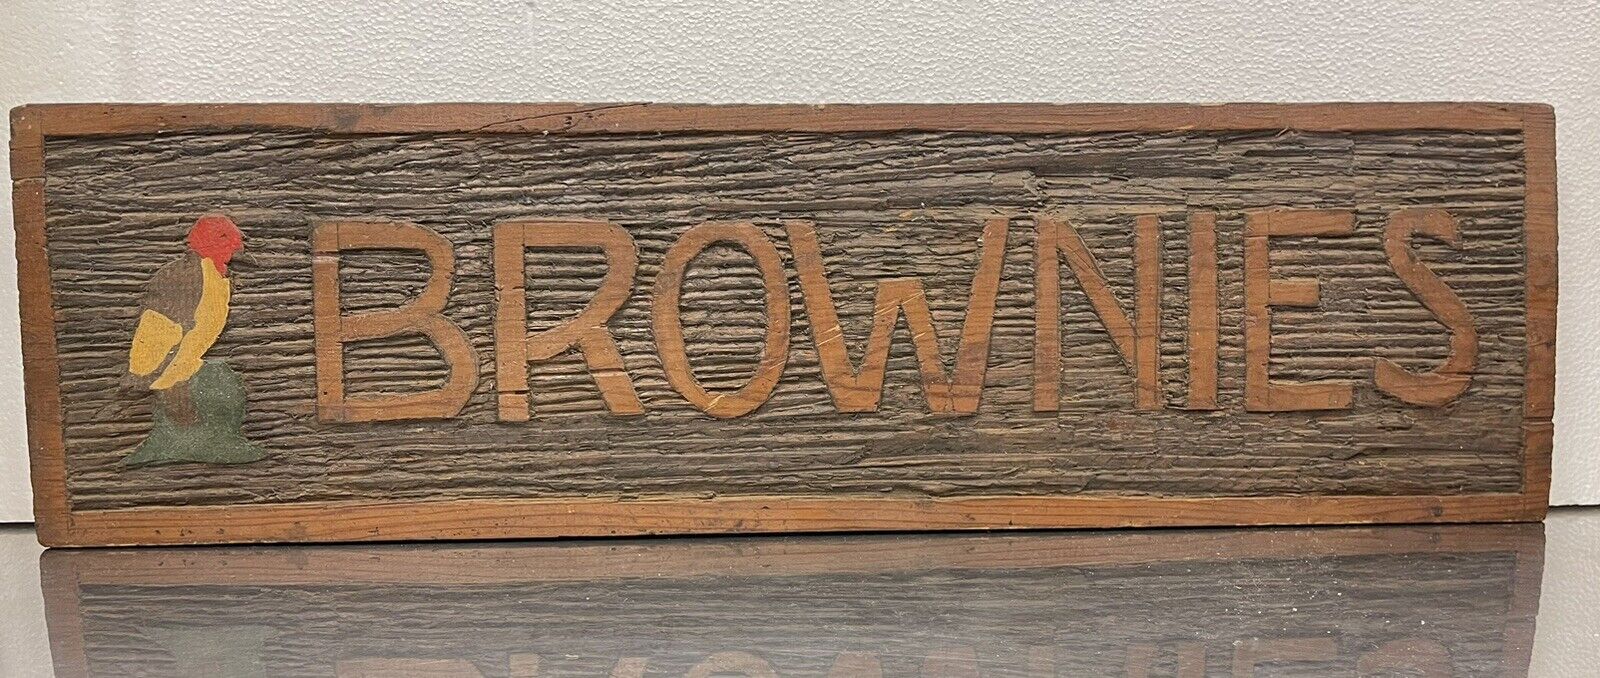 Vintage BROWNIES Wooden Sign 7.5 inches by 26 inches